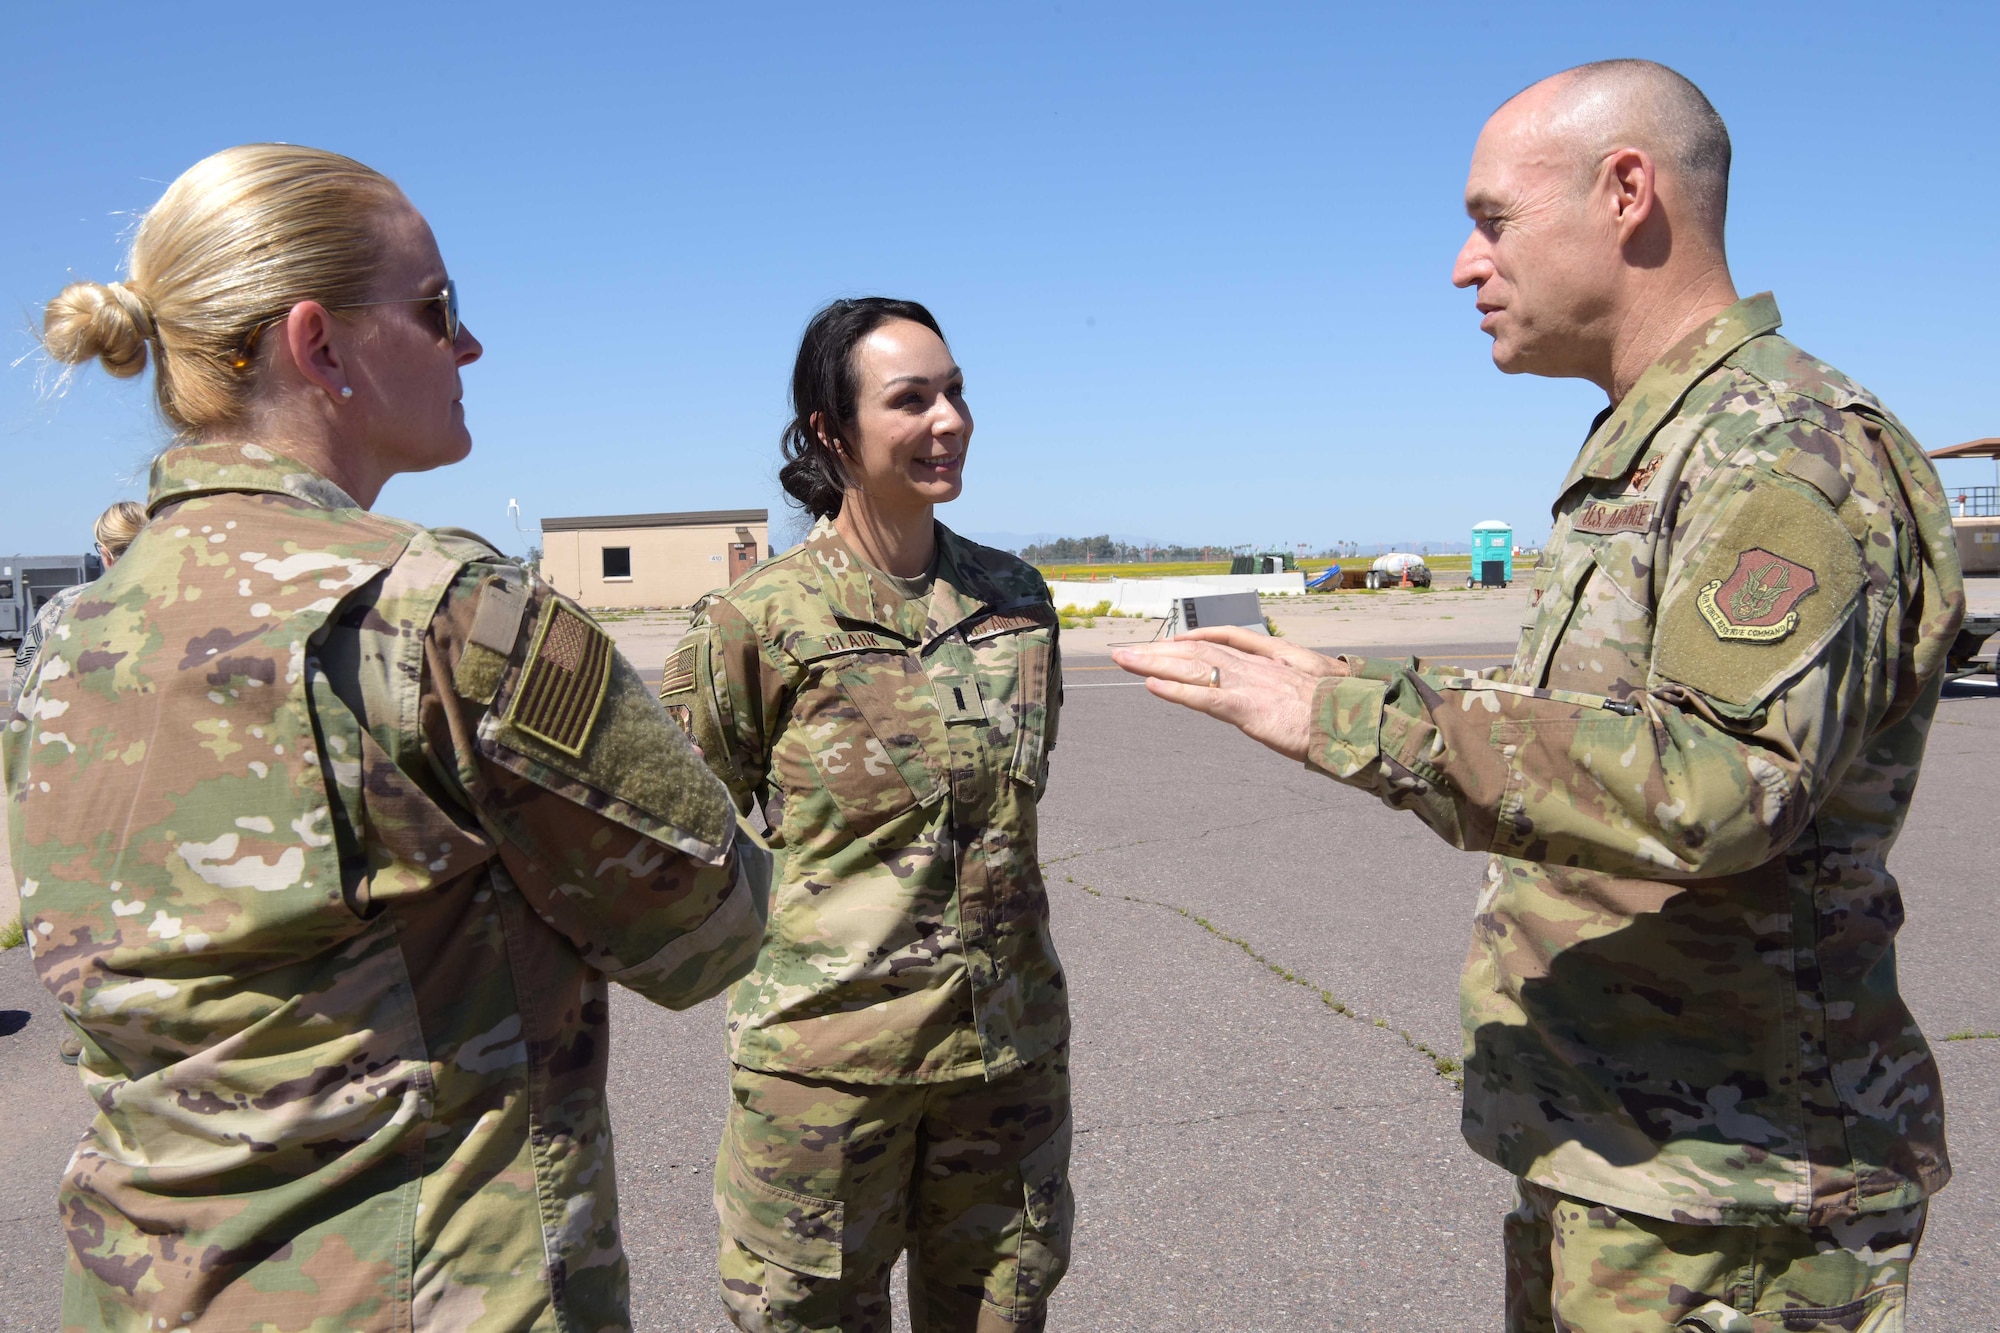 1st Lt. Danielle Clark, 944th Aeromedical Staging Squadron clinical nurse, talks with the 944th Fighter Wing commander, Col. James Greenwald, as the 944 FW Command Chief, Chief Master Sgt. Catherine Buchanan, listens in before Clark departs in support of the COVID-19 pandemic at Luke Air Force Base, Ariz., April 5, 2020. This deployment is part of a larger mobilization package of more than 120 doctors, nurses, and respiratory technicians. Air Force Reserve units across the nation provided over the past 48 hours in support of the COVID-19 response to take care of Americans.